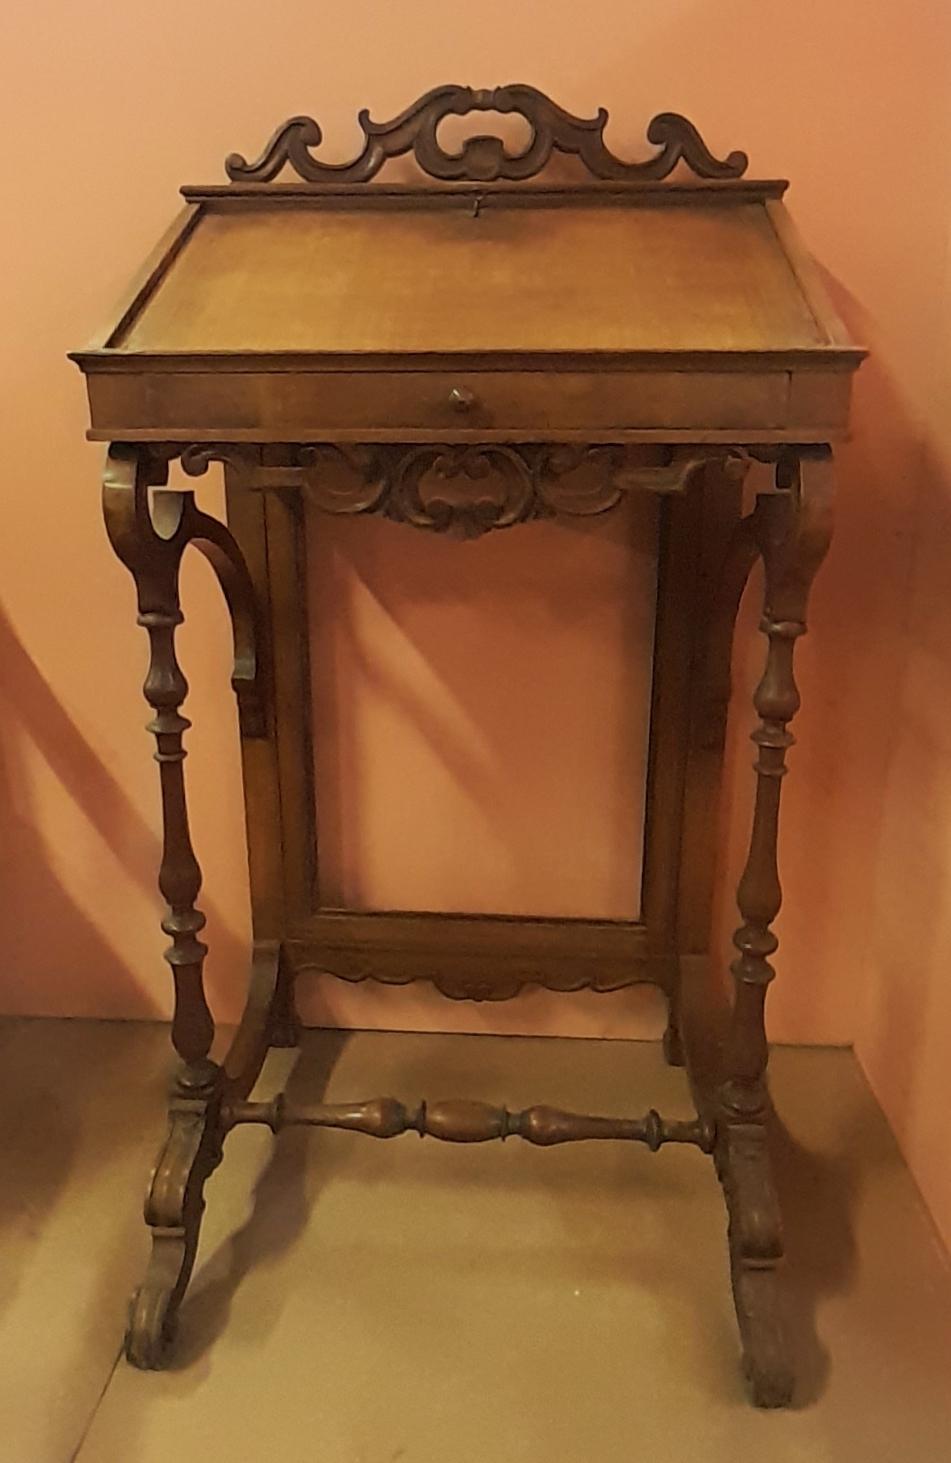 Lectern in cherry wood from the Louis Philippe period (mid 19th century) of Italian origin. 

This kind of lecterns used to be placed near archives, bookshops and libraries. 
Of contained measures and with carved ornamental friezes, it denotes how